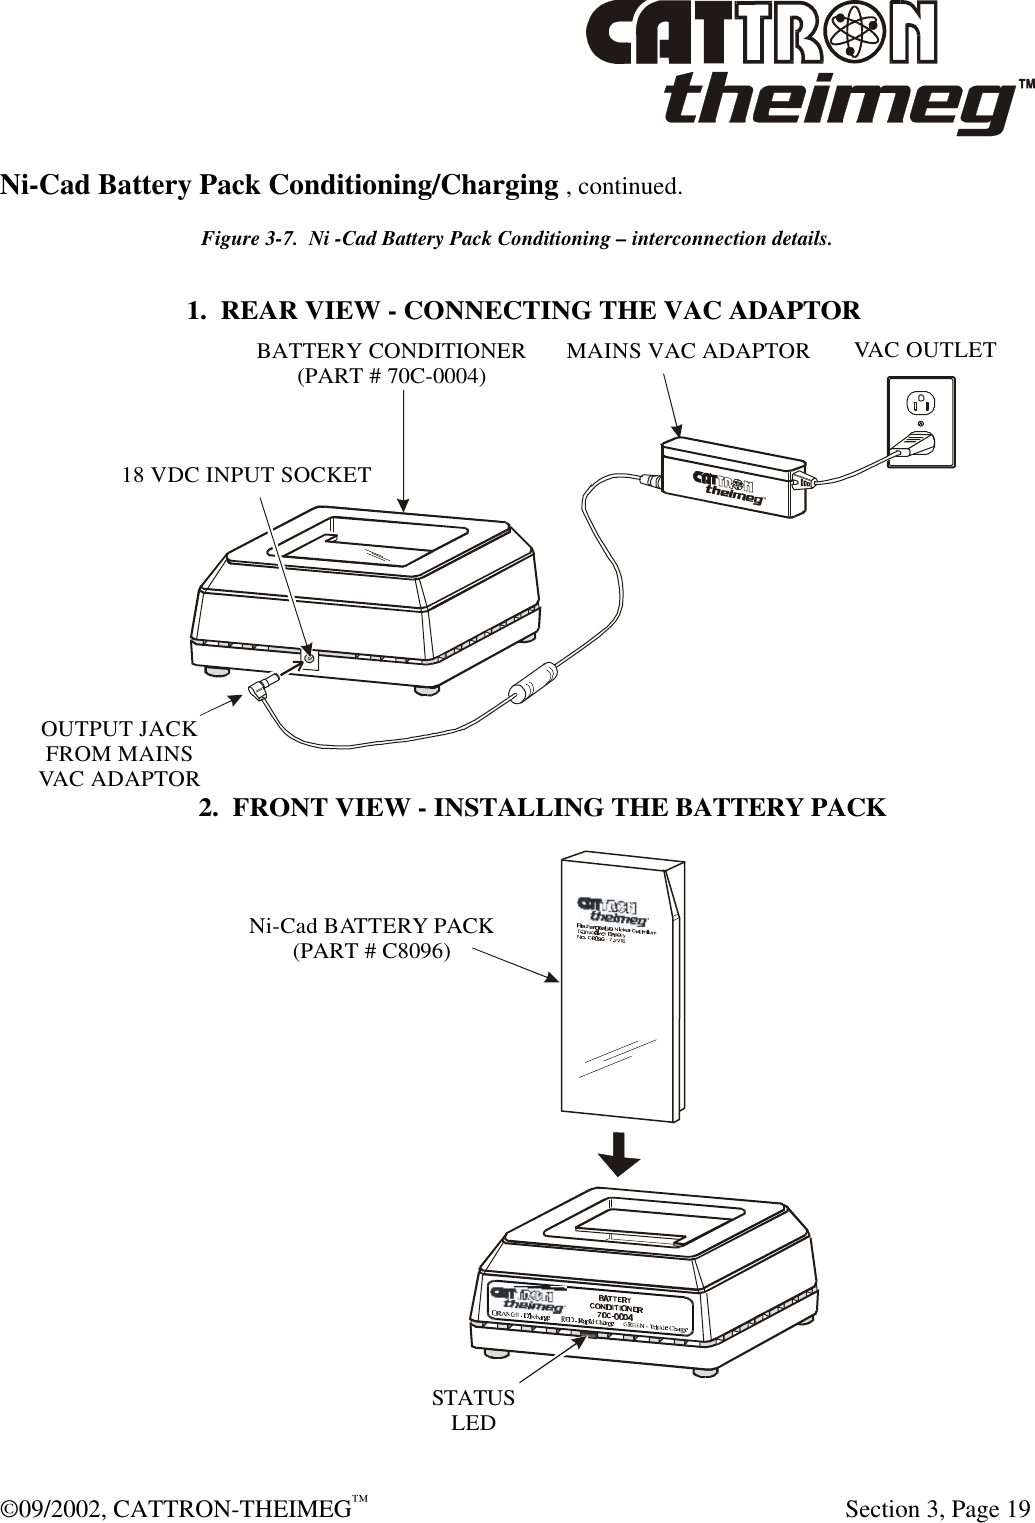  ©09/2002, CATTRON-THEIMEG™   Section 3, Page 19 Ni-Cad Battery Pack Conditioning/Charging , continued. Figure 3-7.  Ni -Cad Battery Pack Conditioning – interconnection details. 1.  REAR VIEW - CONNECTING THE VAC ADAPTOR2.  FRONT VIEW - INSTALLING THE BATTERY PACKOUTPUT JACKFROM MAINSVAC ADAPTORMAINS VAC ADAPTORVAC OUTLET18 VDC INPUT SOCKETBATTERY CONDITIONER(PART # 70C-0004)STATUSLEDNi-Cad BATTERY PACK(PART # C8096)  